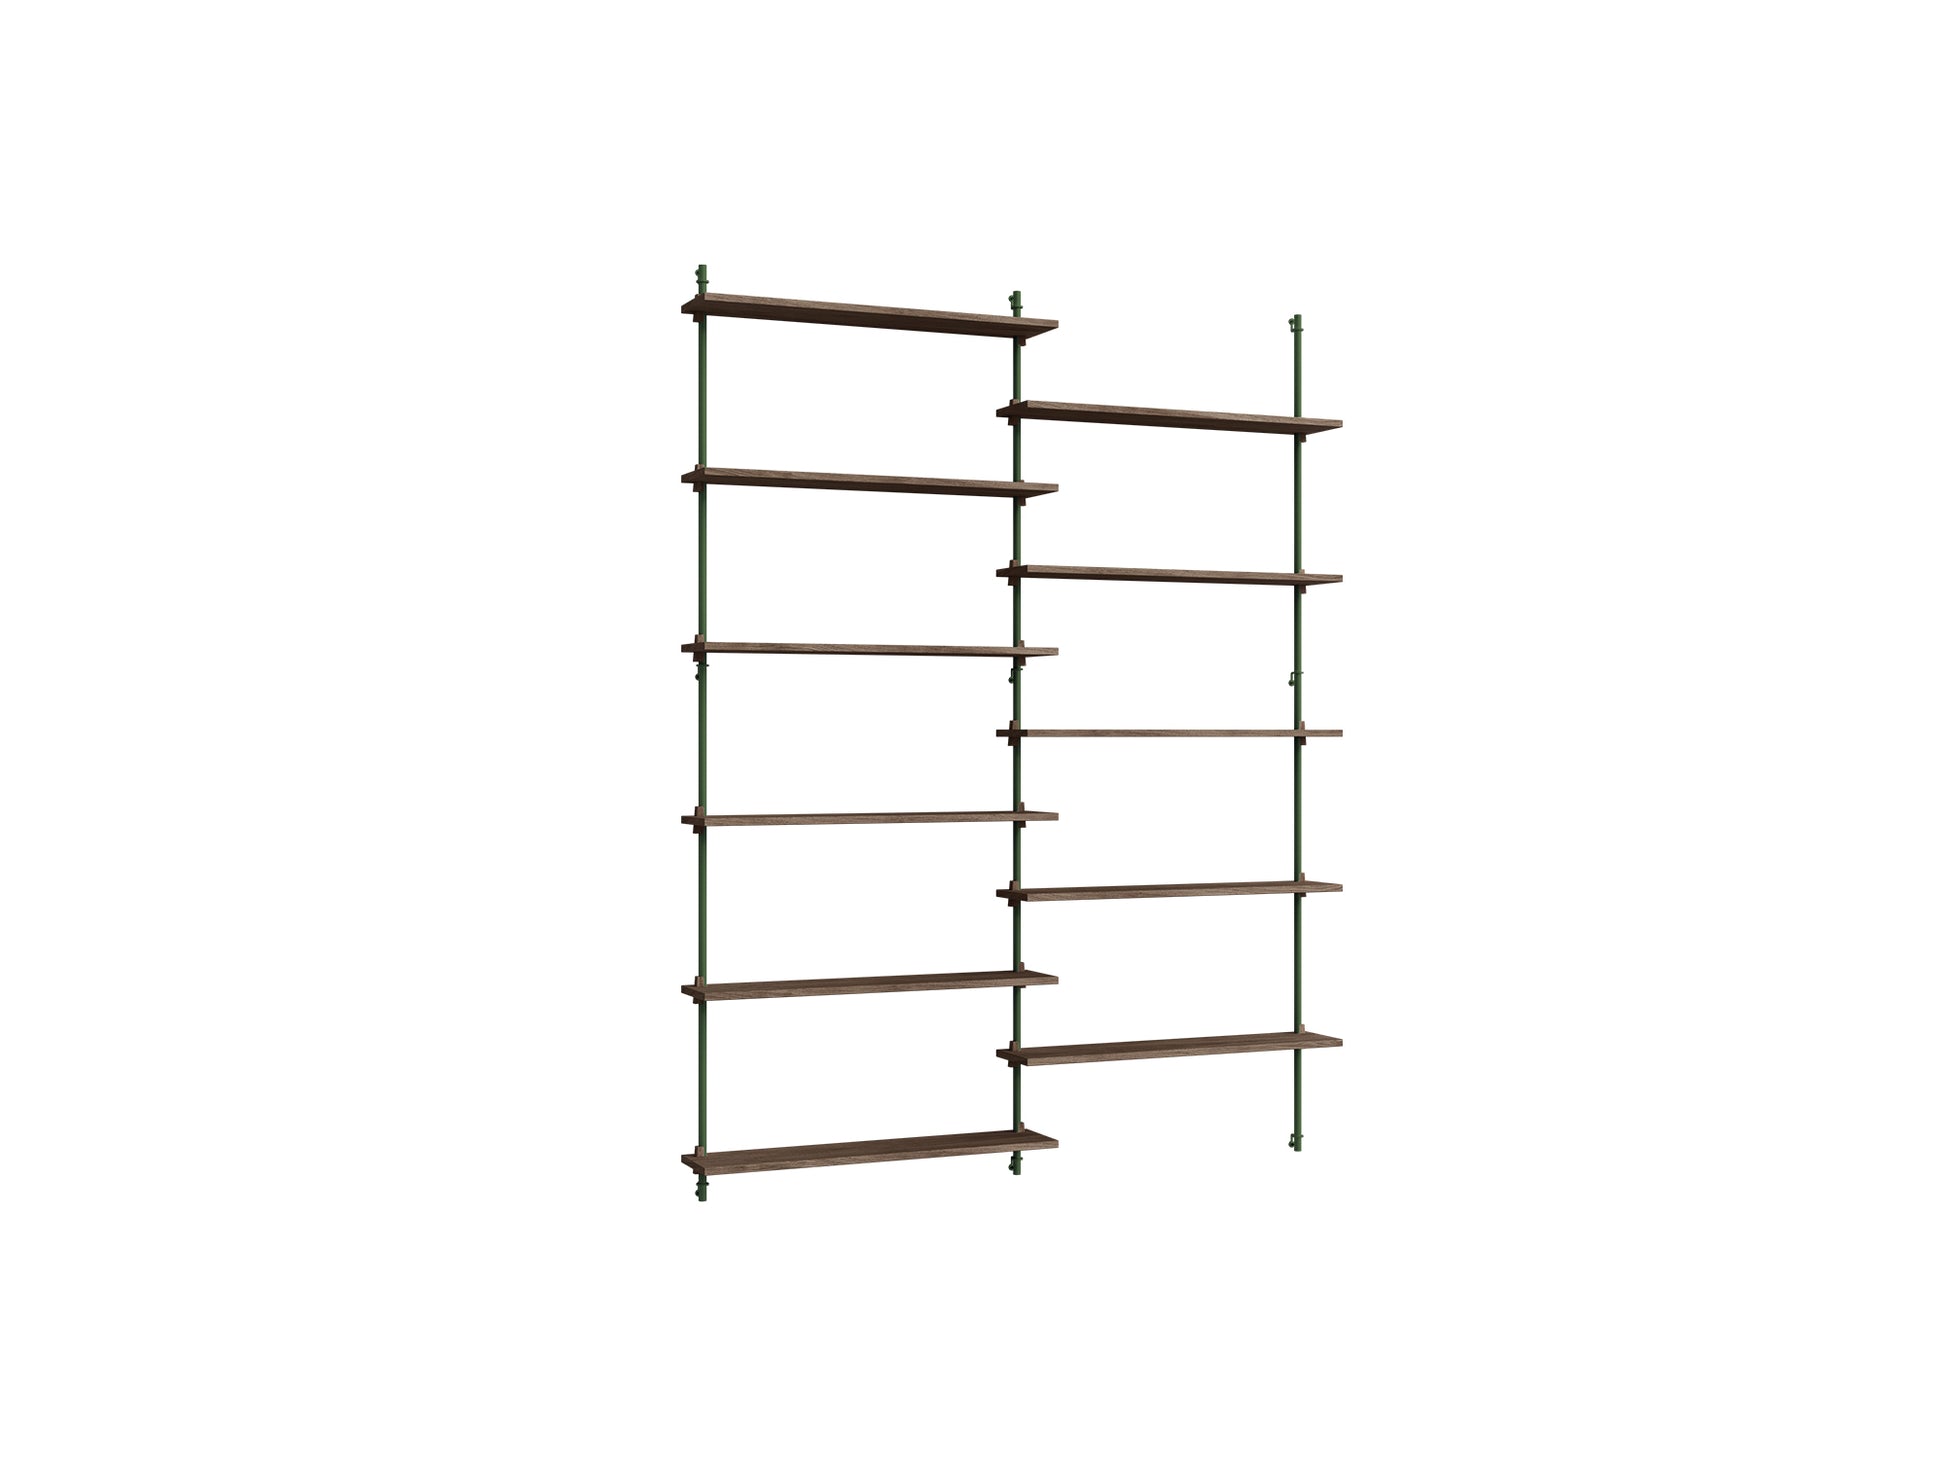 Wall Shelving System Sets (200 cm) by Moebe - WS.200.2 / Pine Green Uprights / Smoked Oak